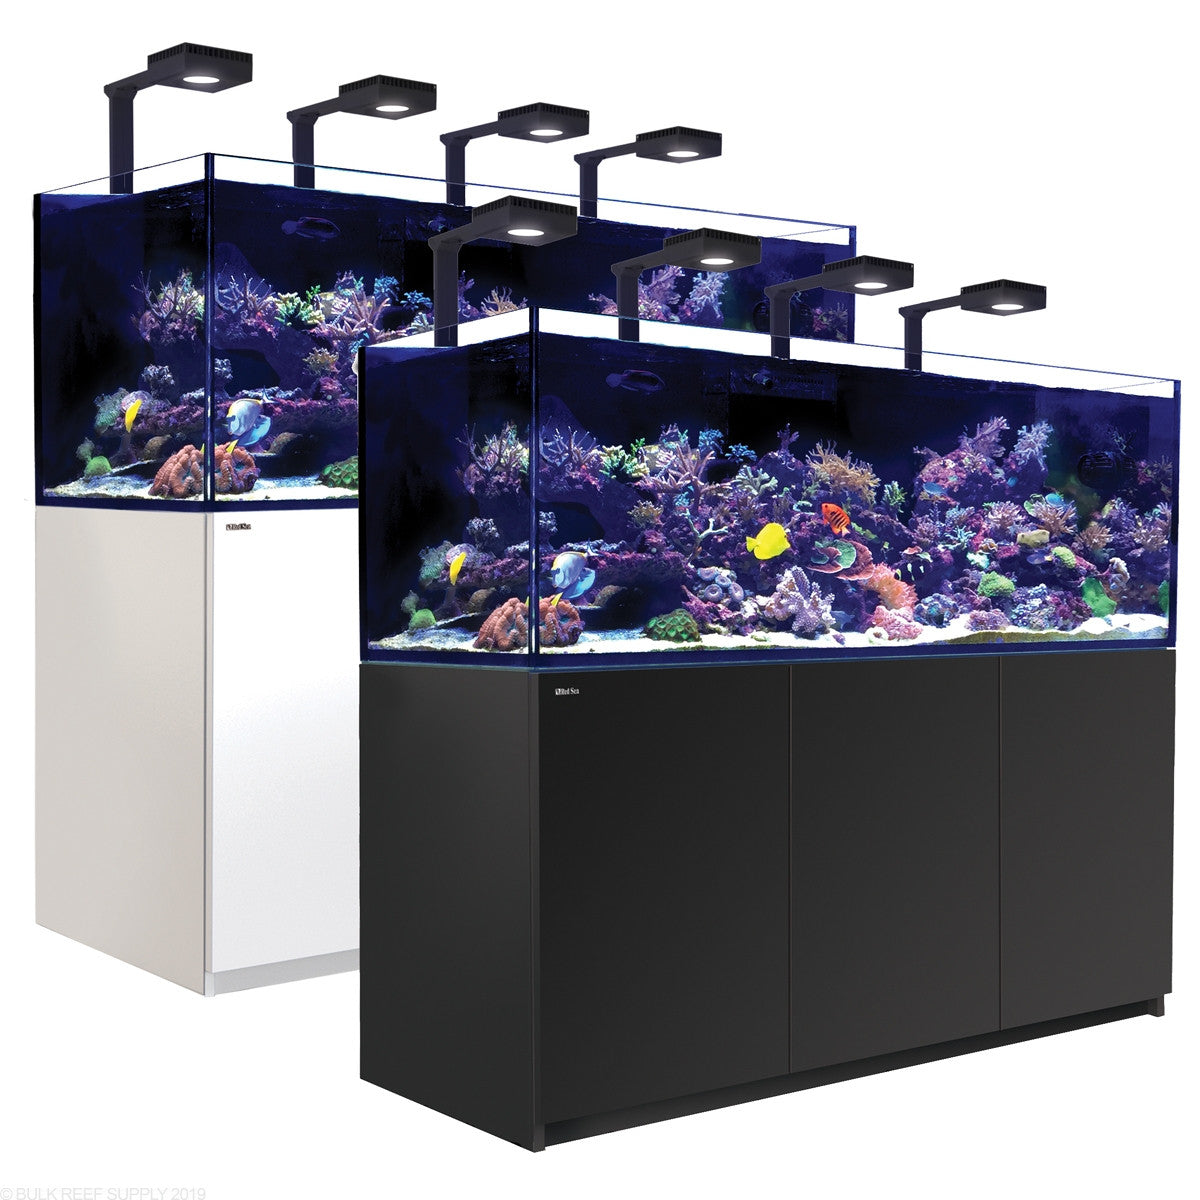 RedSea Reefer G2+ 750 Deluxe [ Incl 4x ReefLED 90 ]